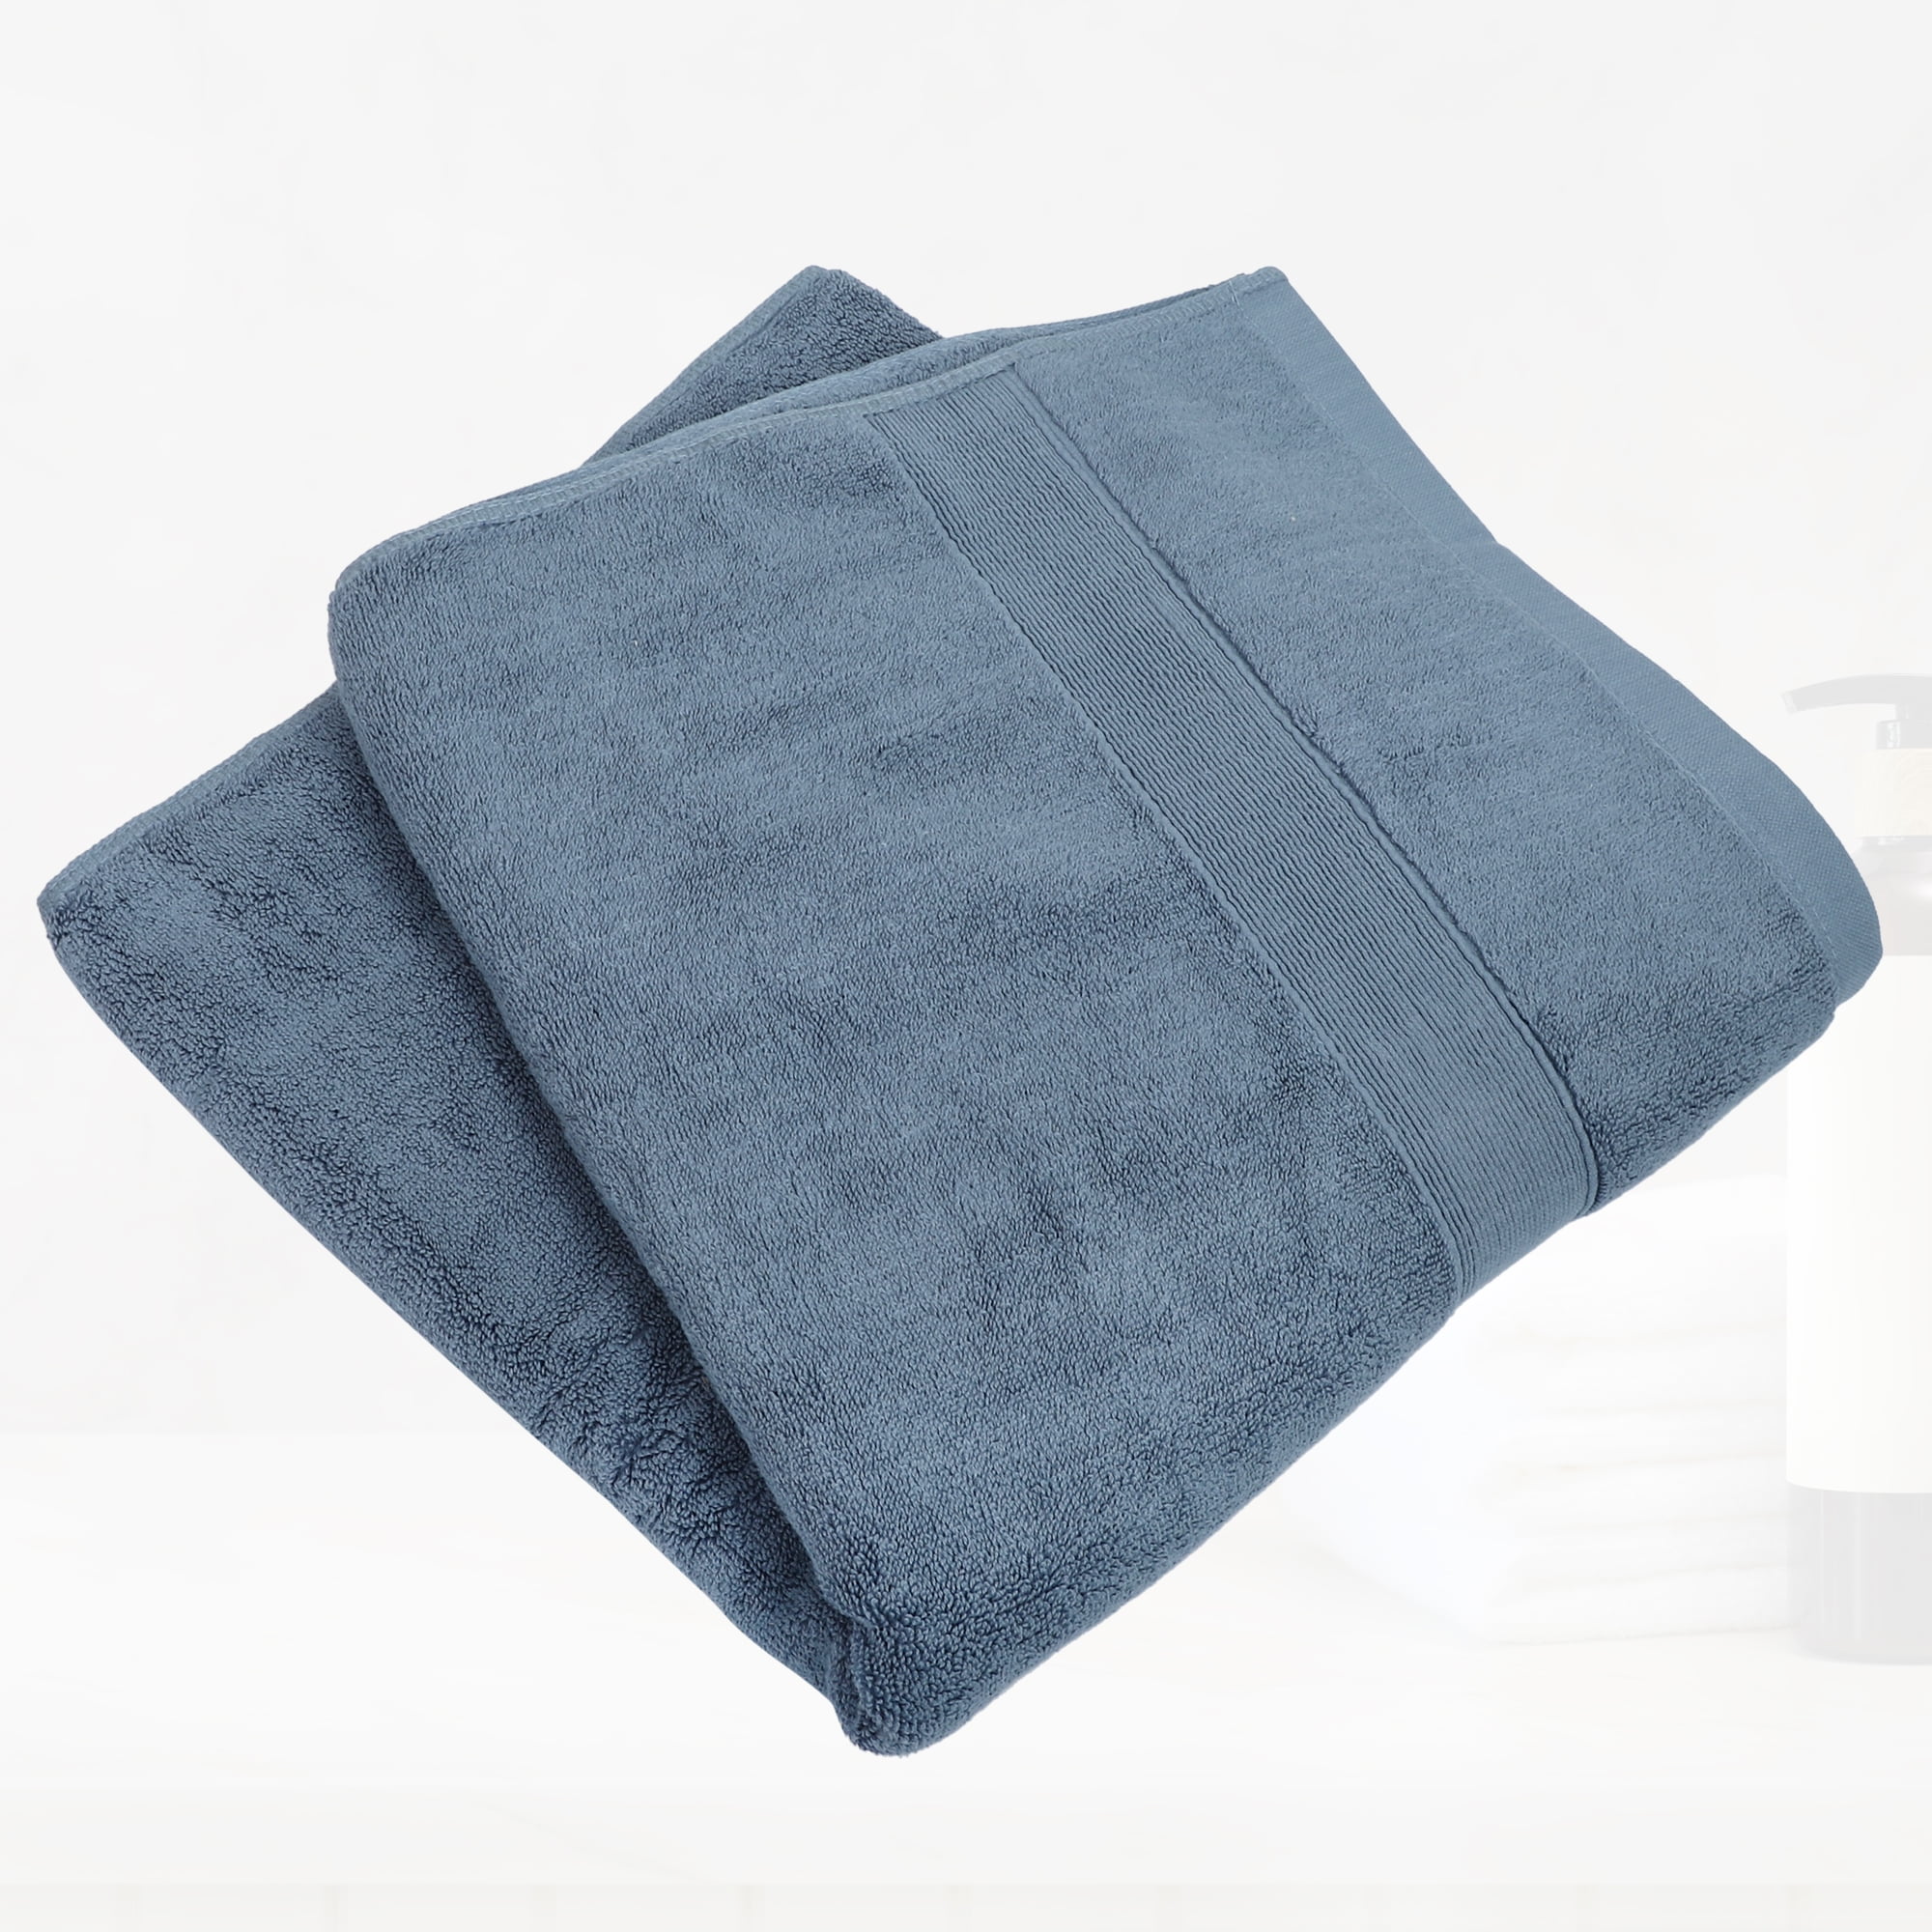 The Big One® Color Block Bath Towel Collection